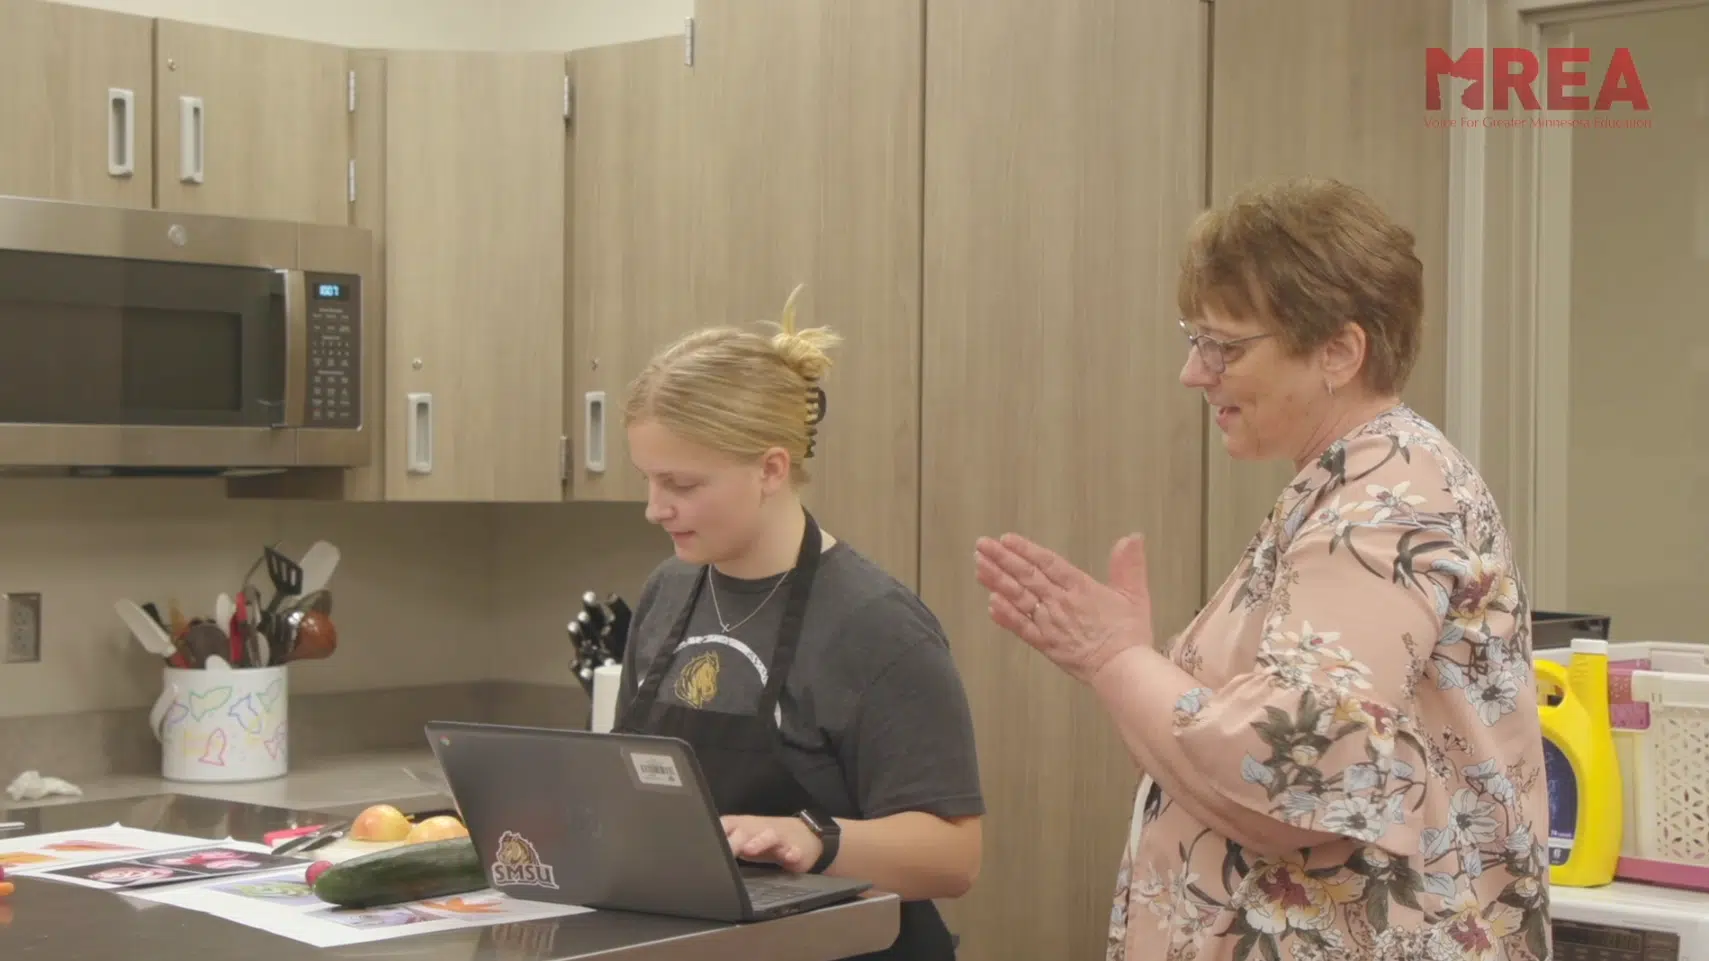 A teacher in a Family and Consumer Science class kitchen smiling and talking to a student who is working at the counter, wearing an apron. There is a laptop on the counter.